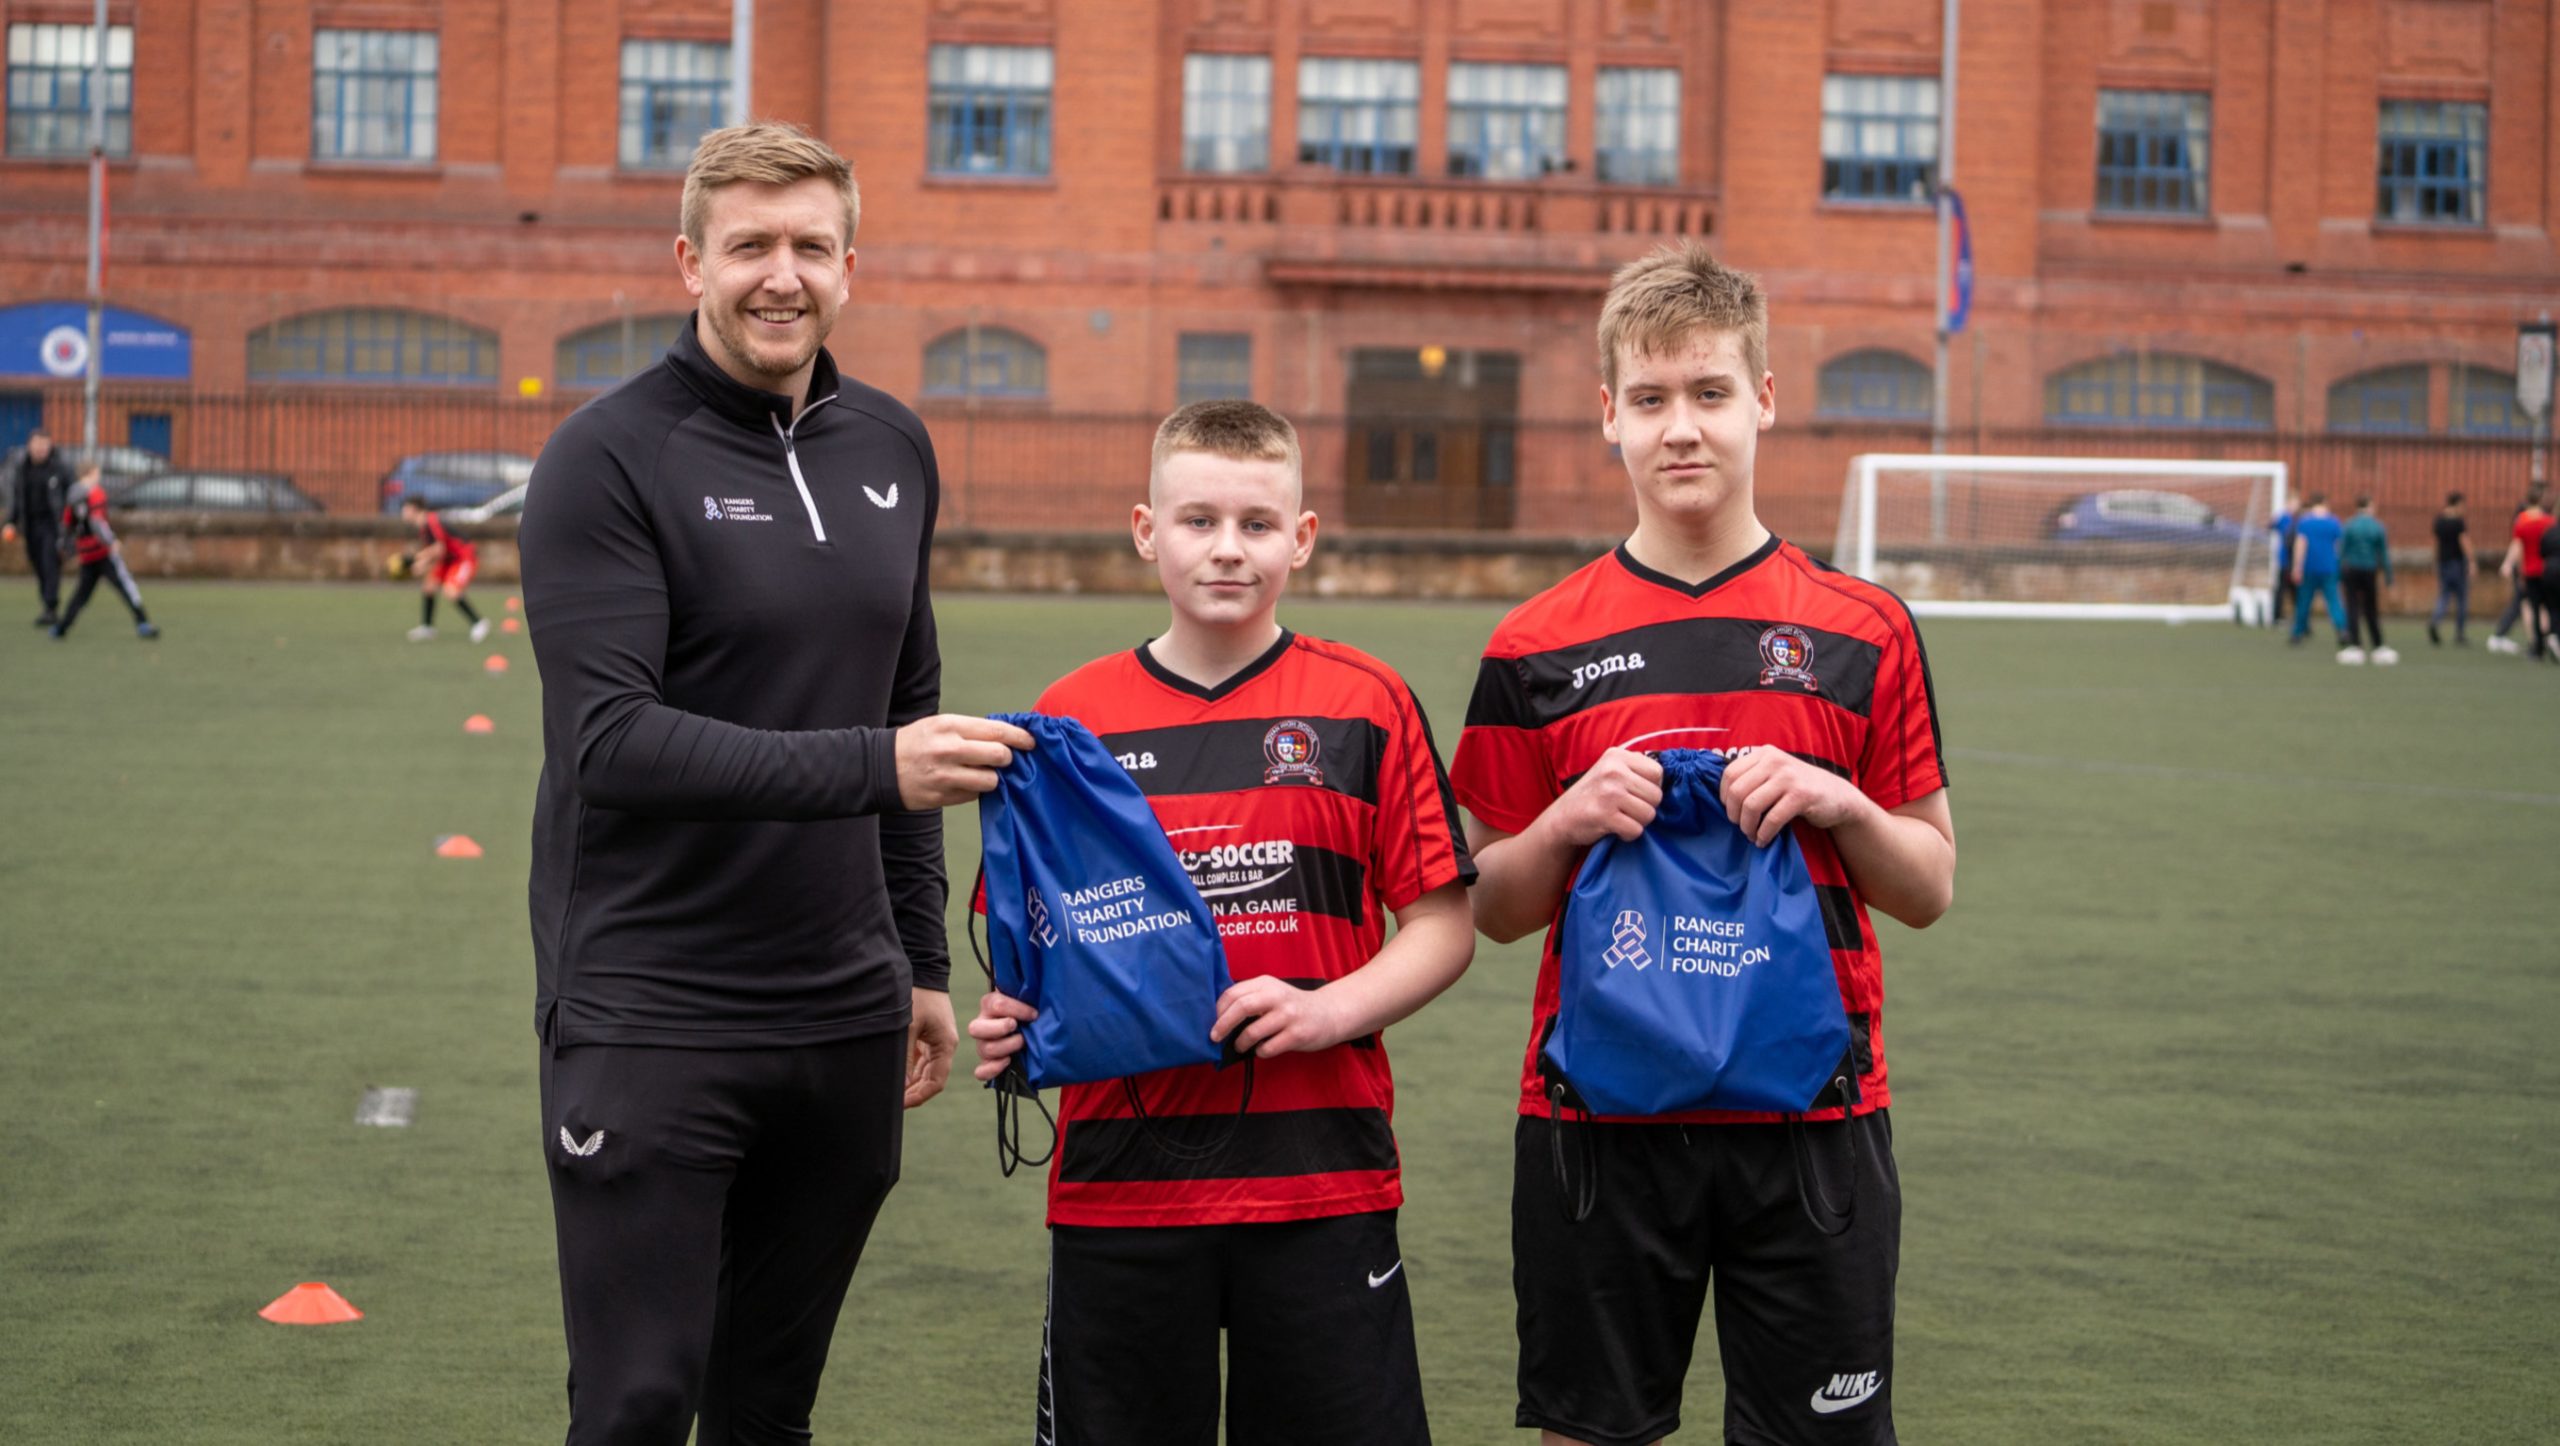 Foundation Brings School Pupils Together For Tour and Tournament